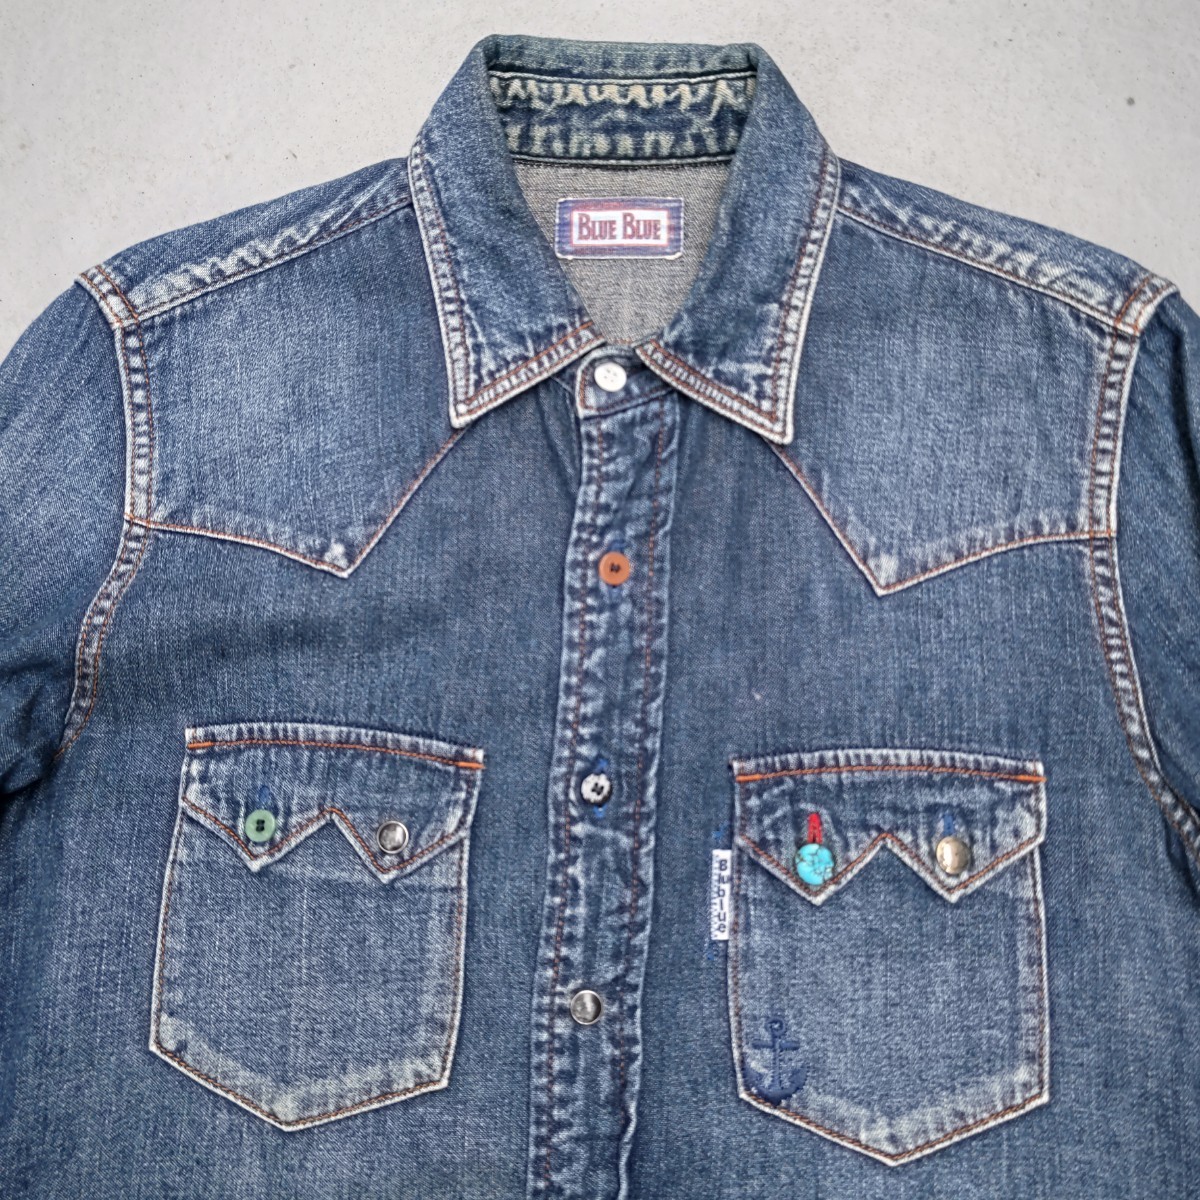  Hollywood Ranch Market BLUE BLUE Denim shirt [1]HRM.... used processing long sleeve shirt men's S turquoise 